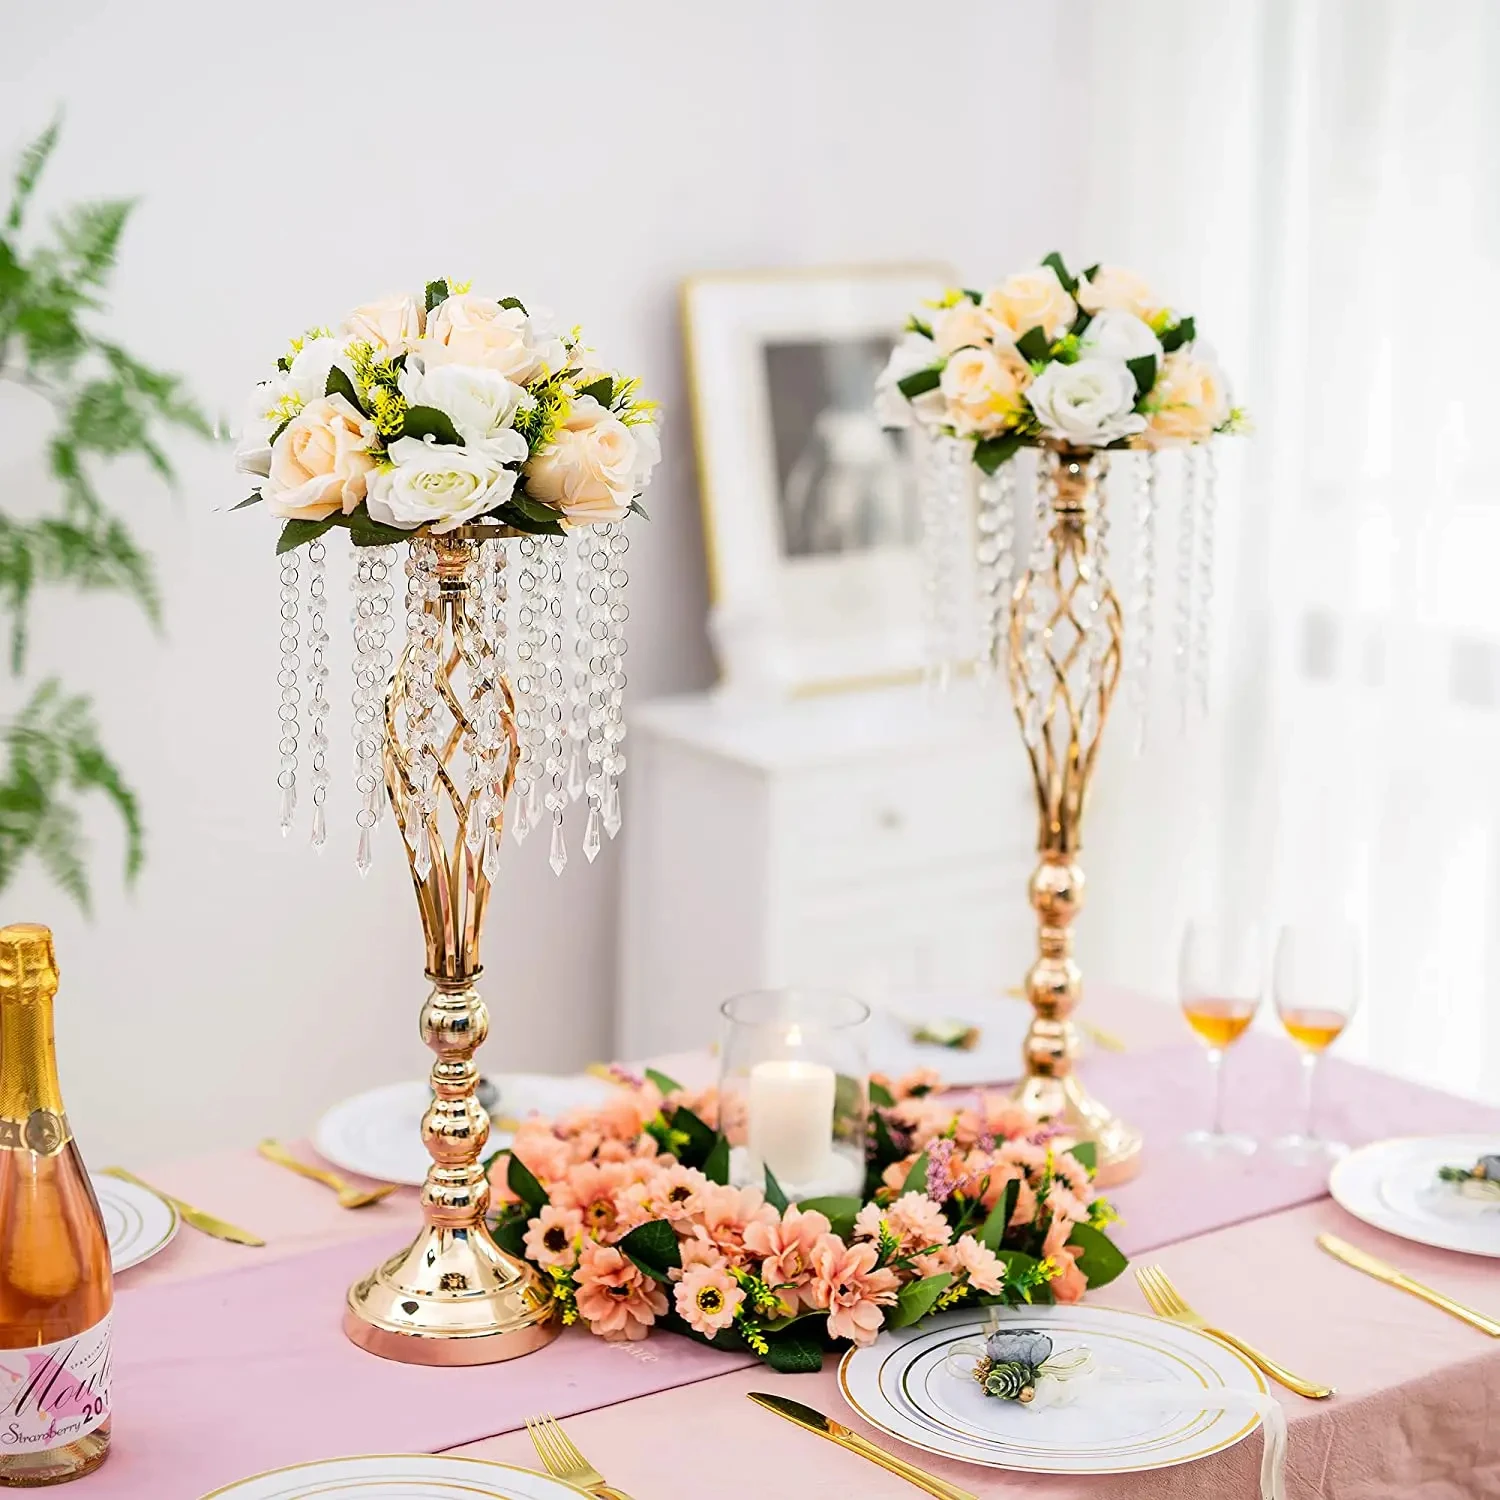 

10 Pcs Gold Vase for Wedding Centerpieces Table Decorations with Chandelier Crystals, Flower Vase, Wedding Metal Flower Stand